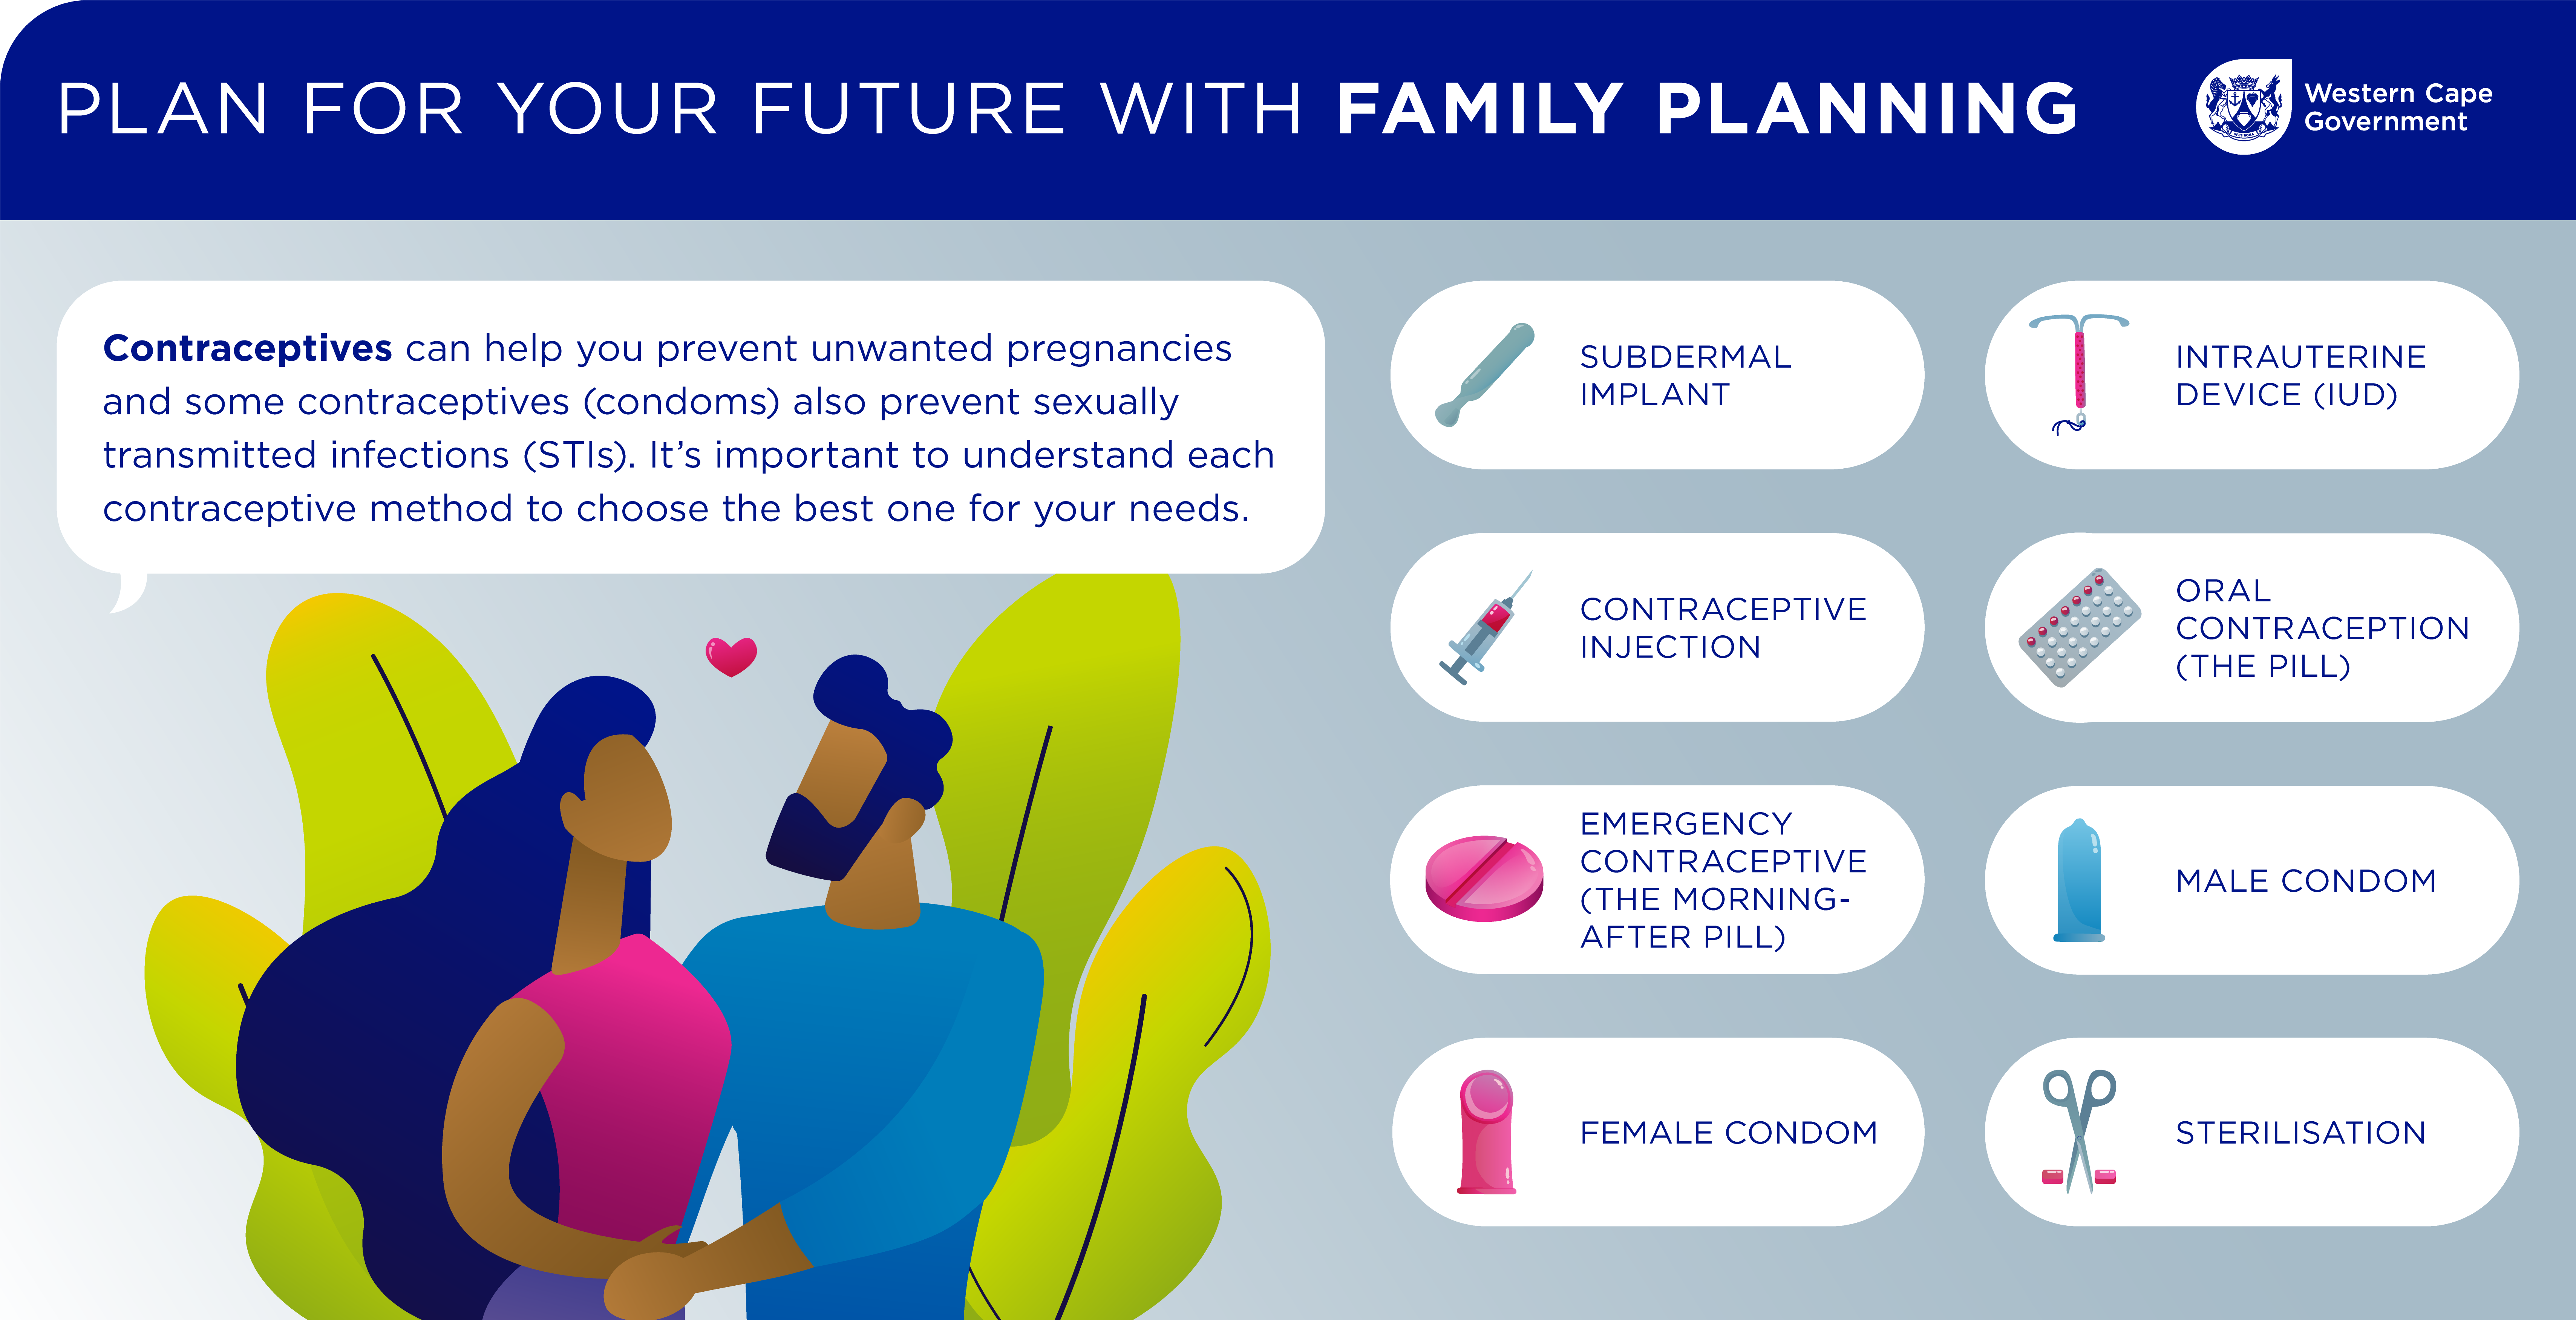 PLAN FOR YOUR FUTURE WITH FAMILY PLANNING FEMALE CONDOM: Contraceptives can help you prevent unwanted pregnancies and some contraceptives (condoms) also prevent sexually transmitted infections (STIs). It’s important to understand each contraceptive method